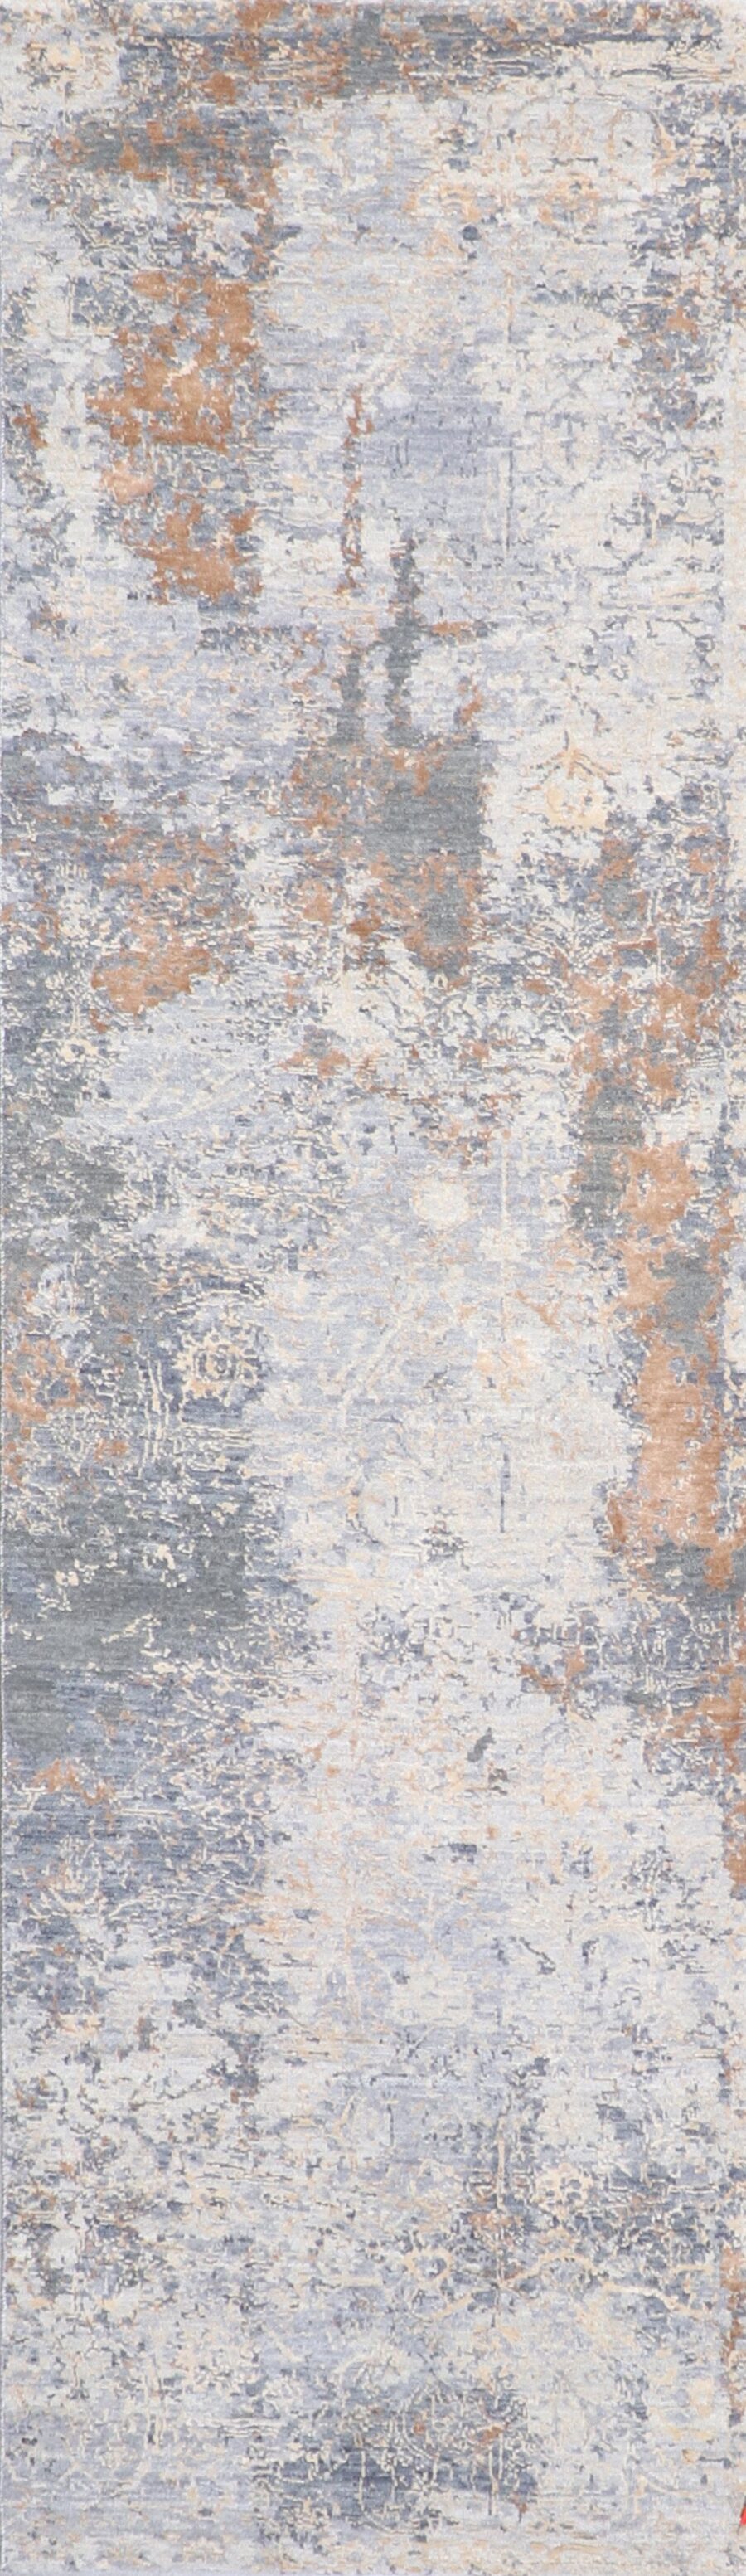 2’7”x10’ Transitional Gray Wool & Silk Hand-Knotted Rug - Direct Rug Import | Rugs in Chicago, Indiana,South Bend,Granger